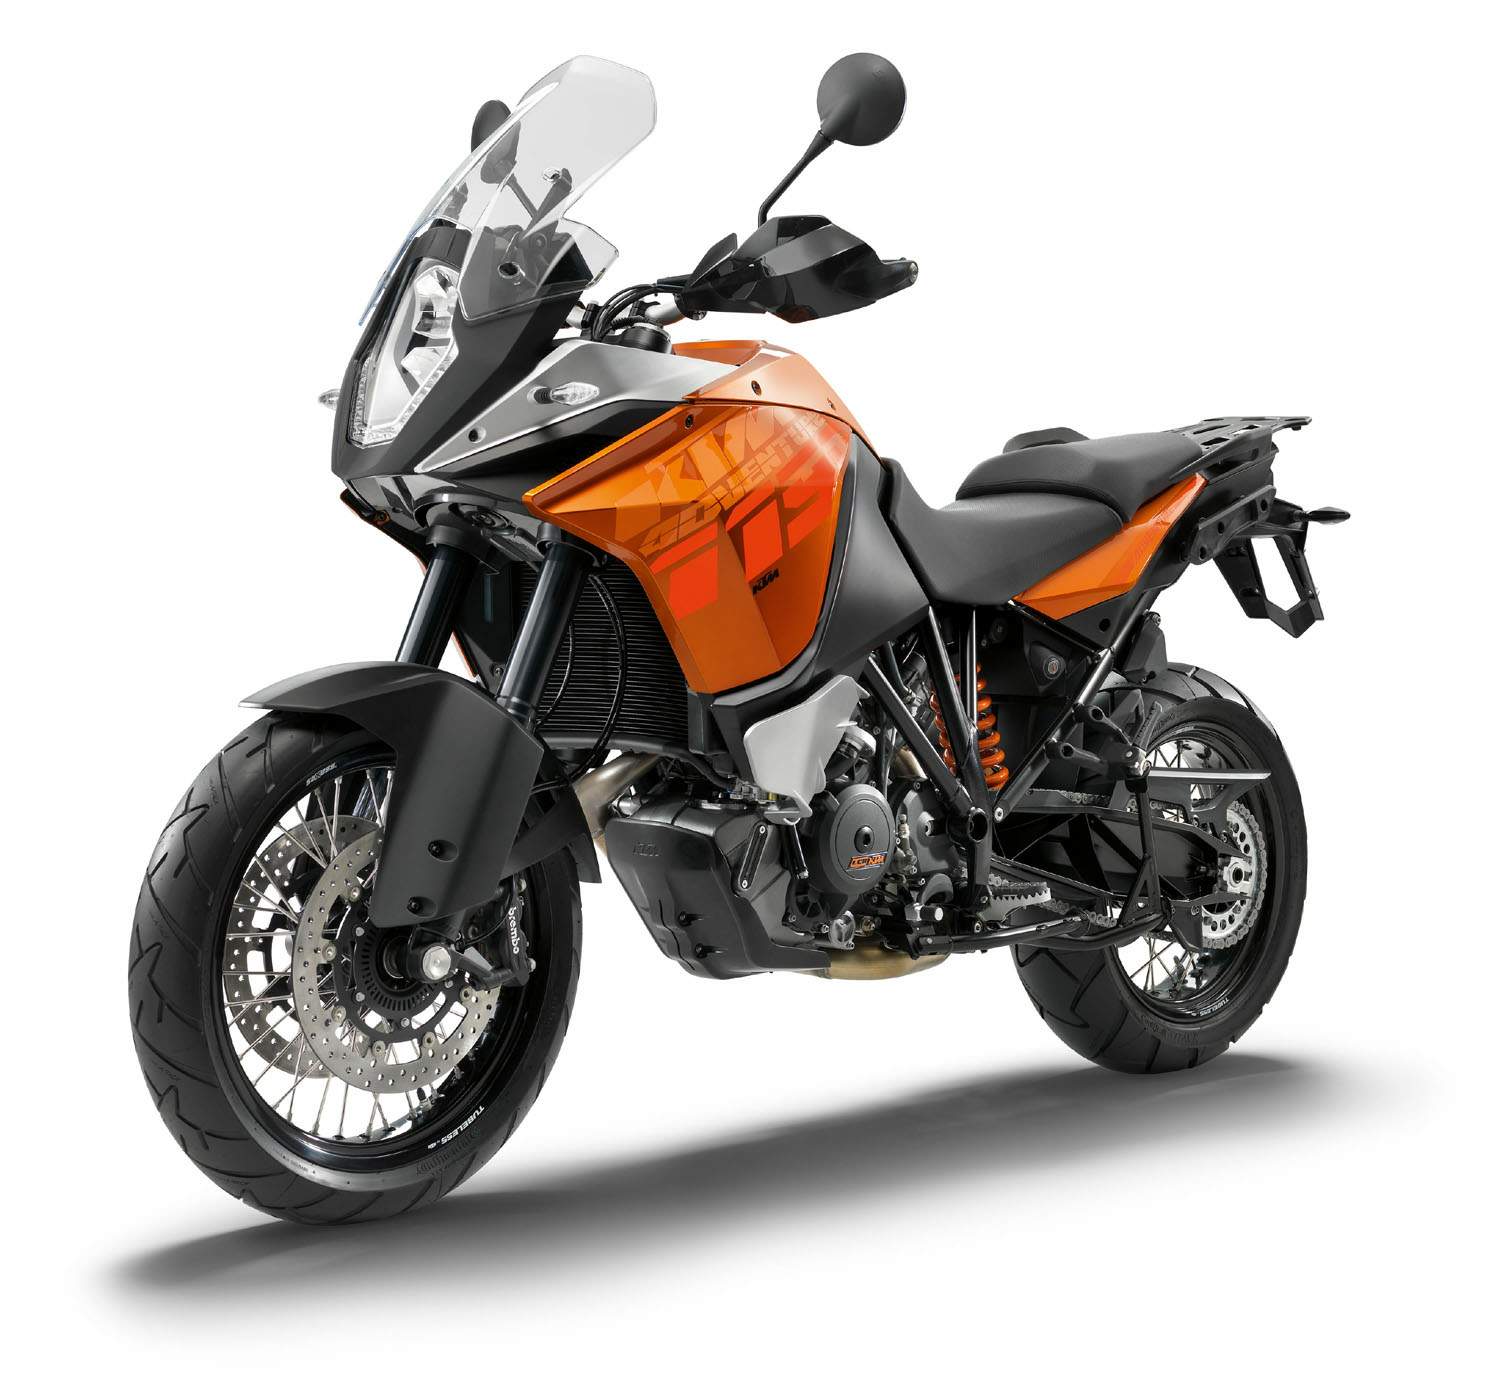  KTM 390 Adventure confirmed for India